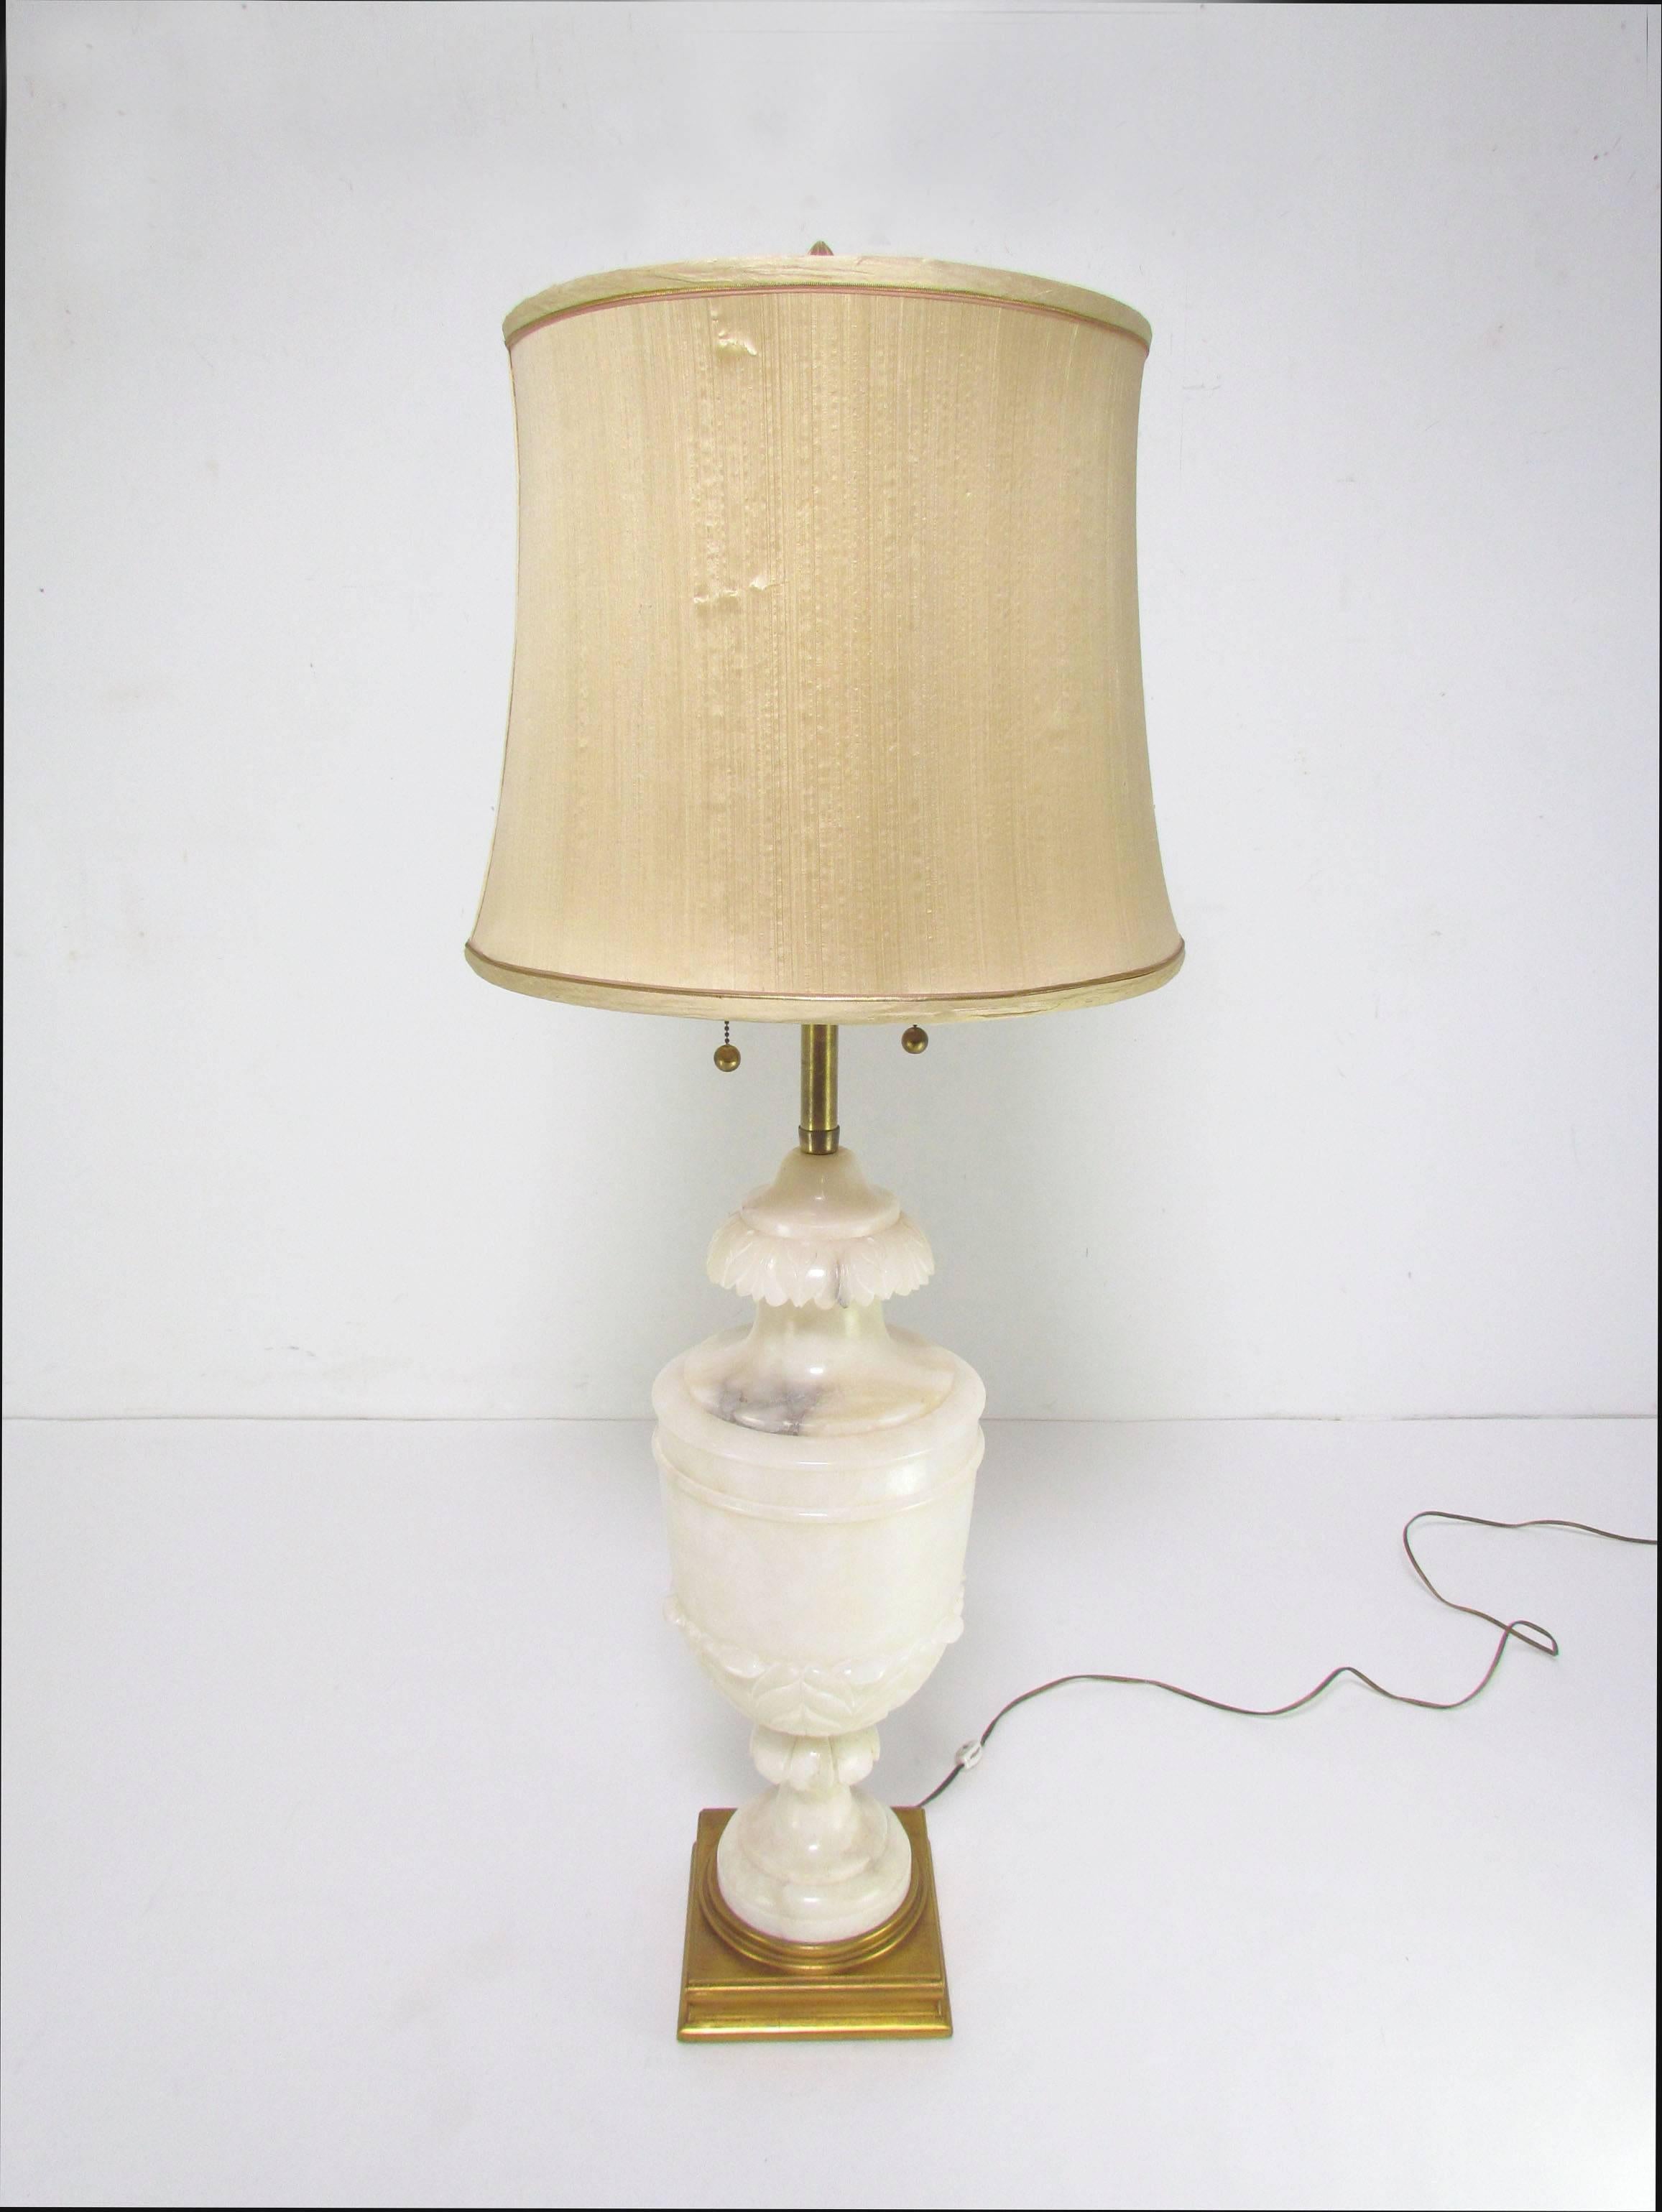 Large and impressive center-piece table lamp by Marbro Lamp Co. in carved alabaster, with gilt base, circa 1950s.

48